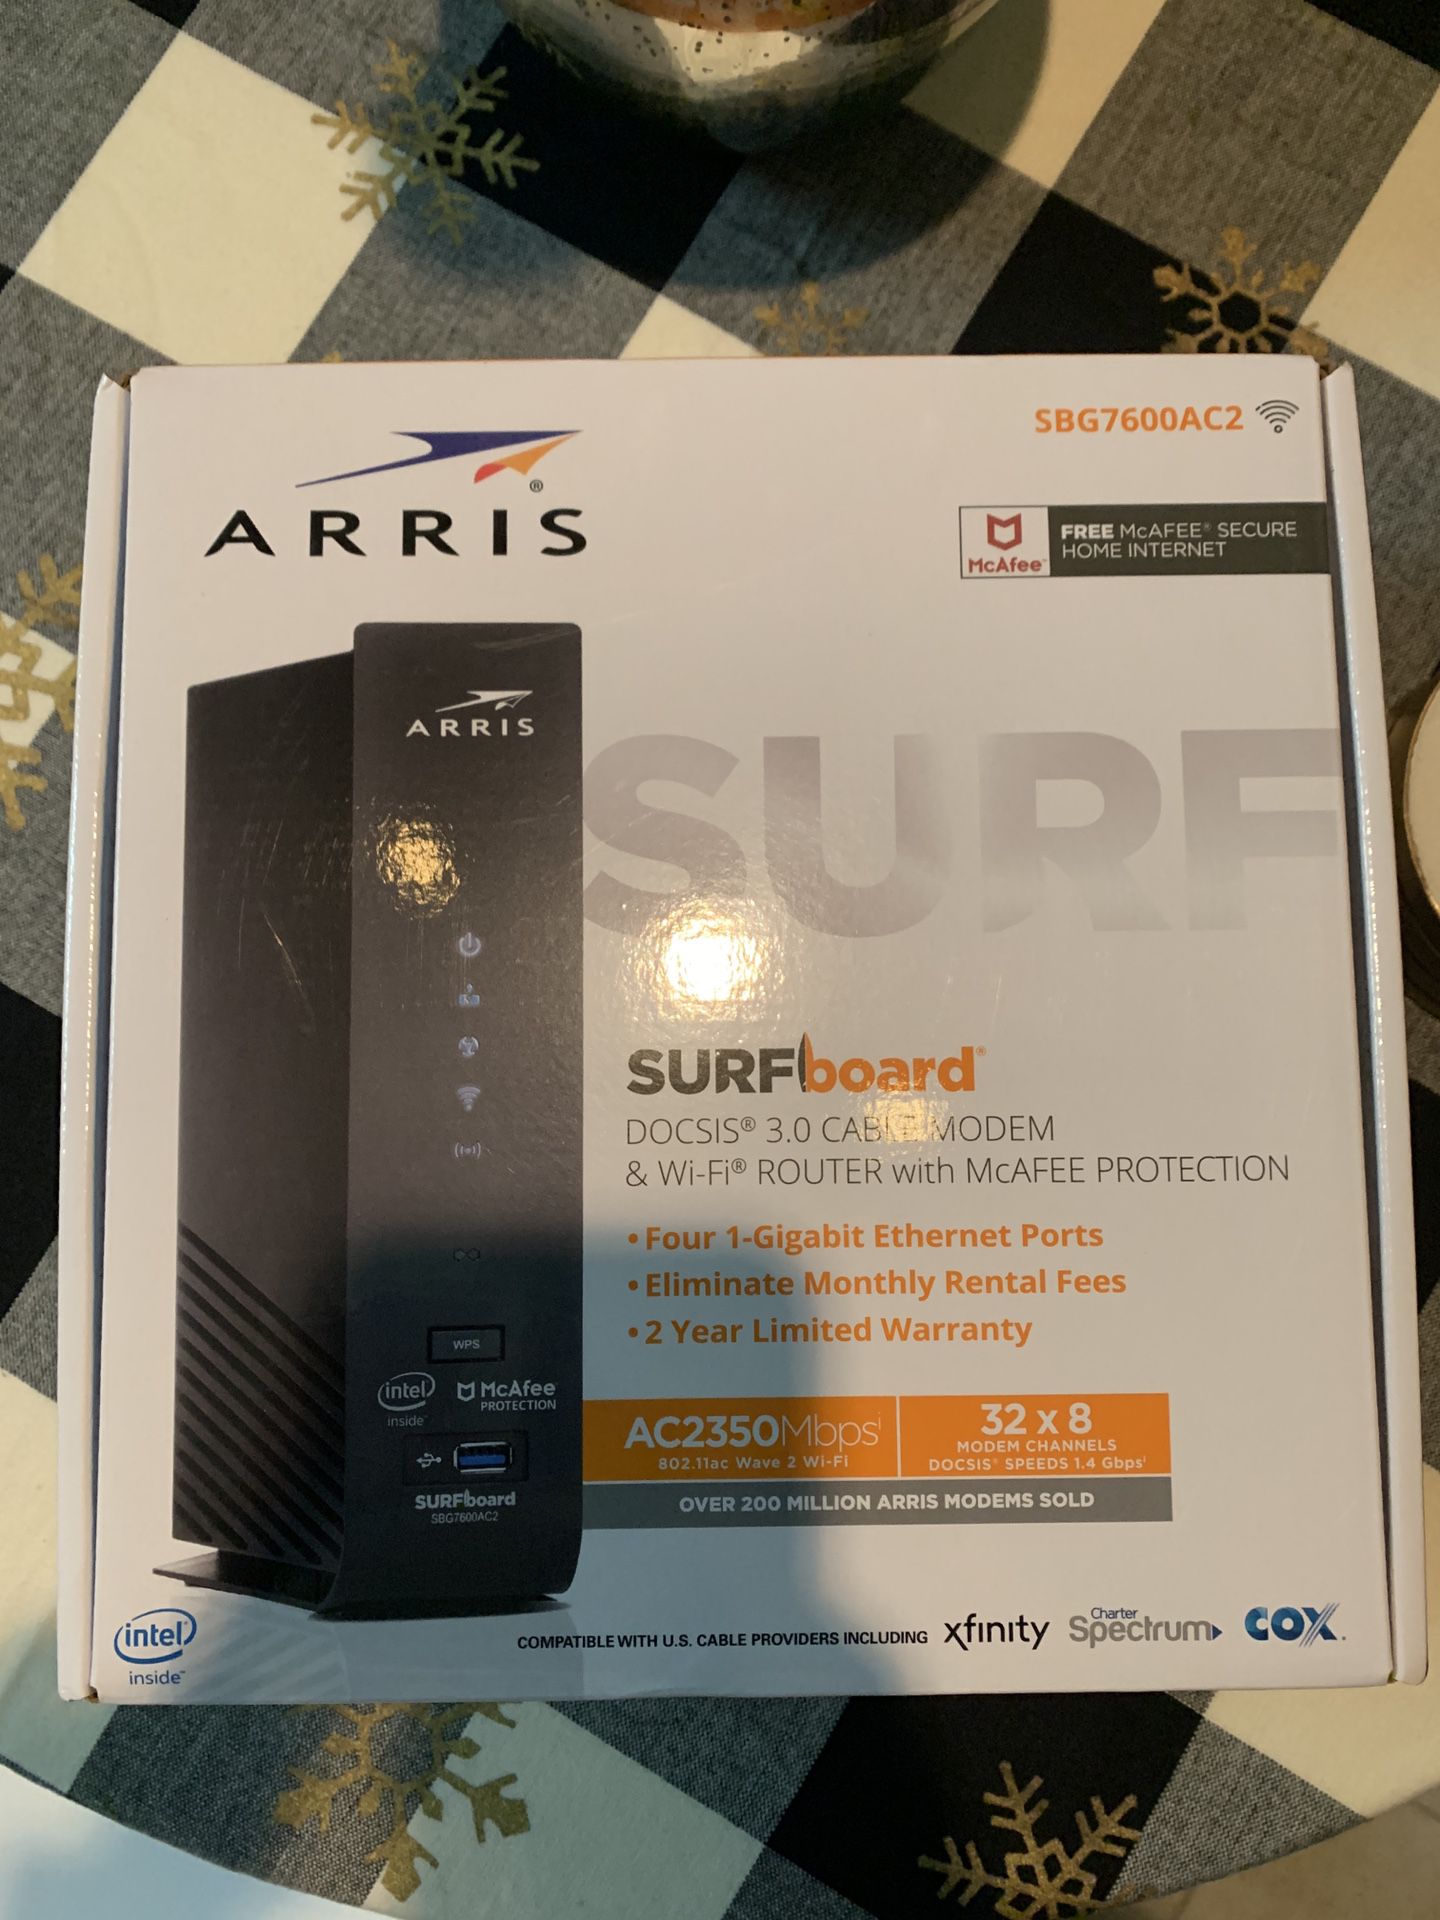 SURFboard cable modem and Wi-Fi router